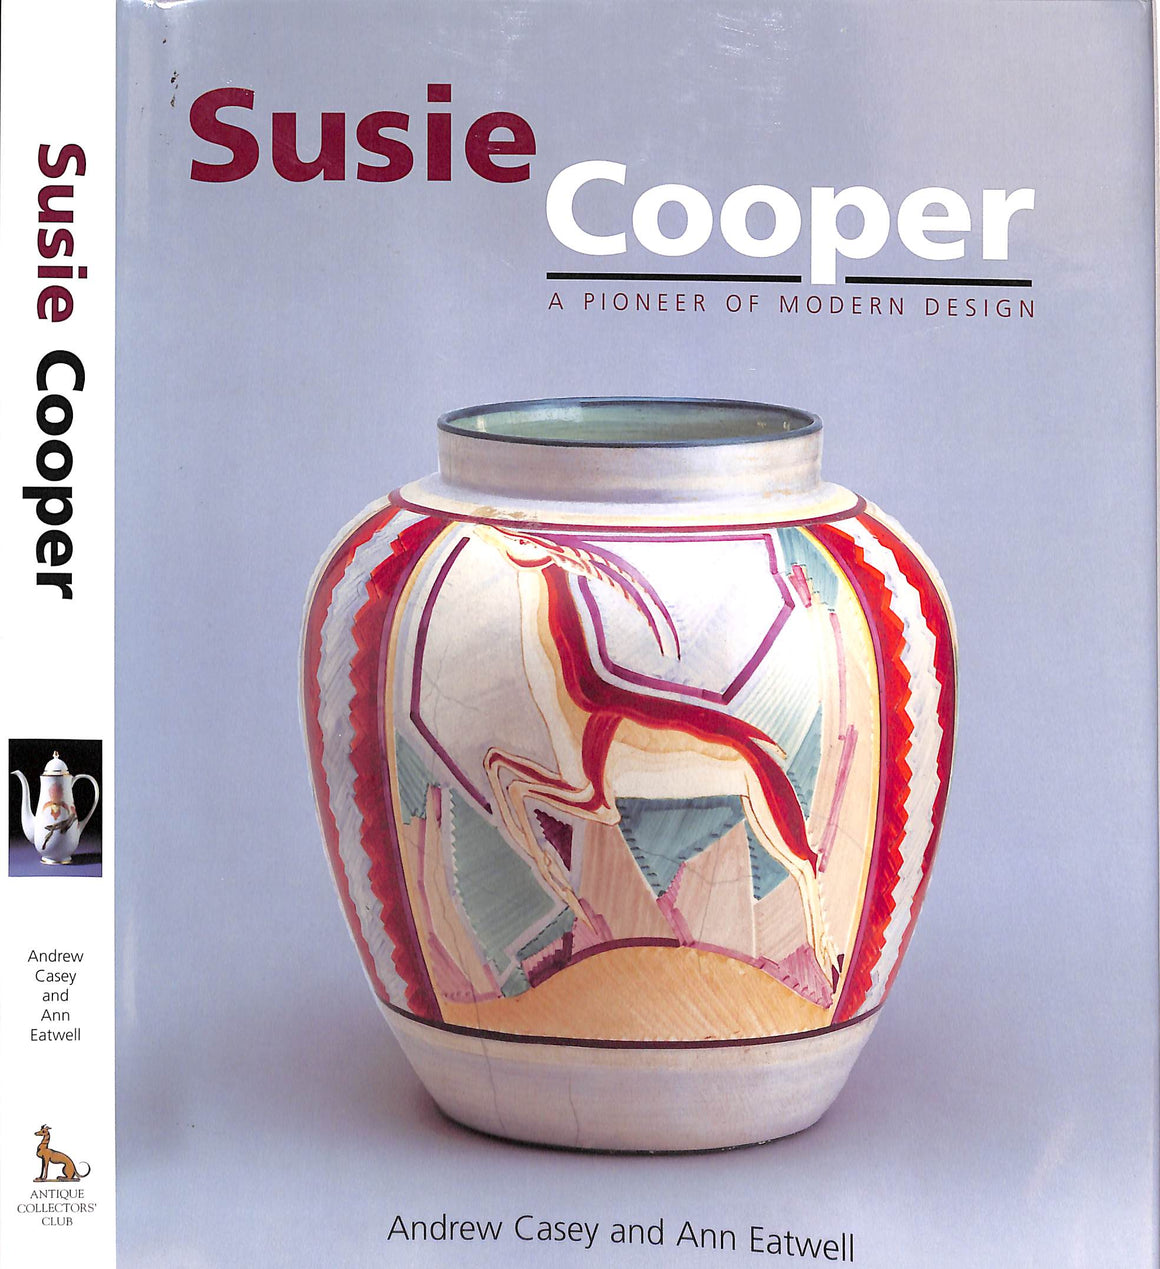 "Susie Cooper: A Pioneer Of Modern Design" 2002 EATWELL, Ann and CASEY, Andrew [edited by]